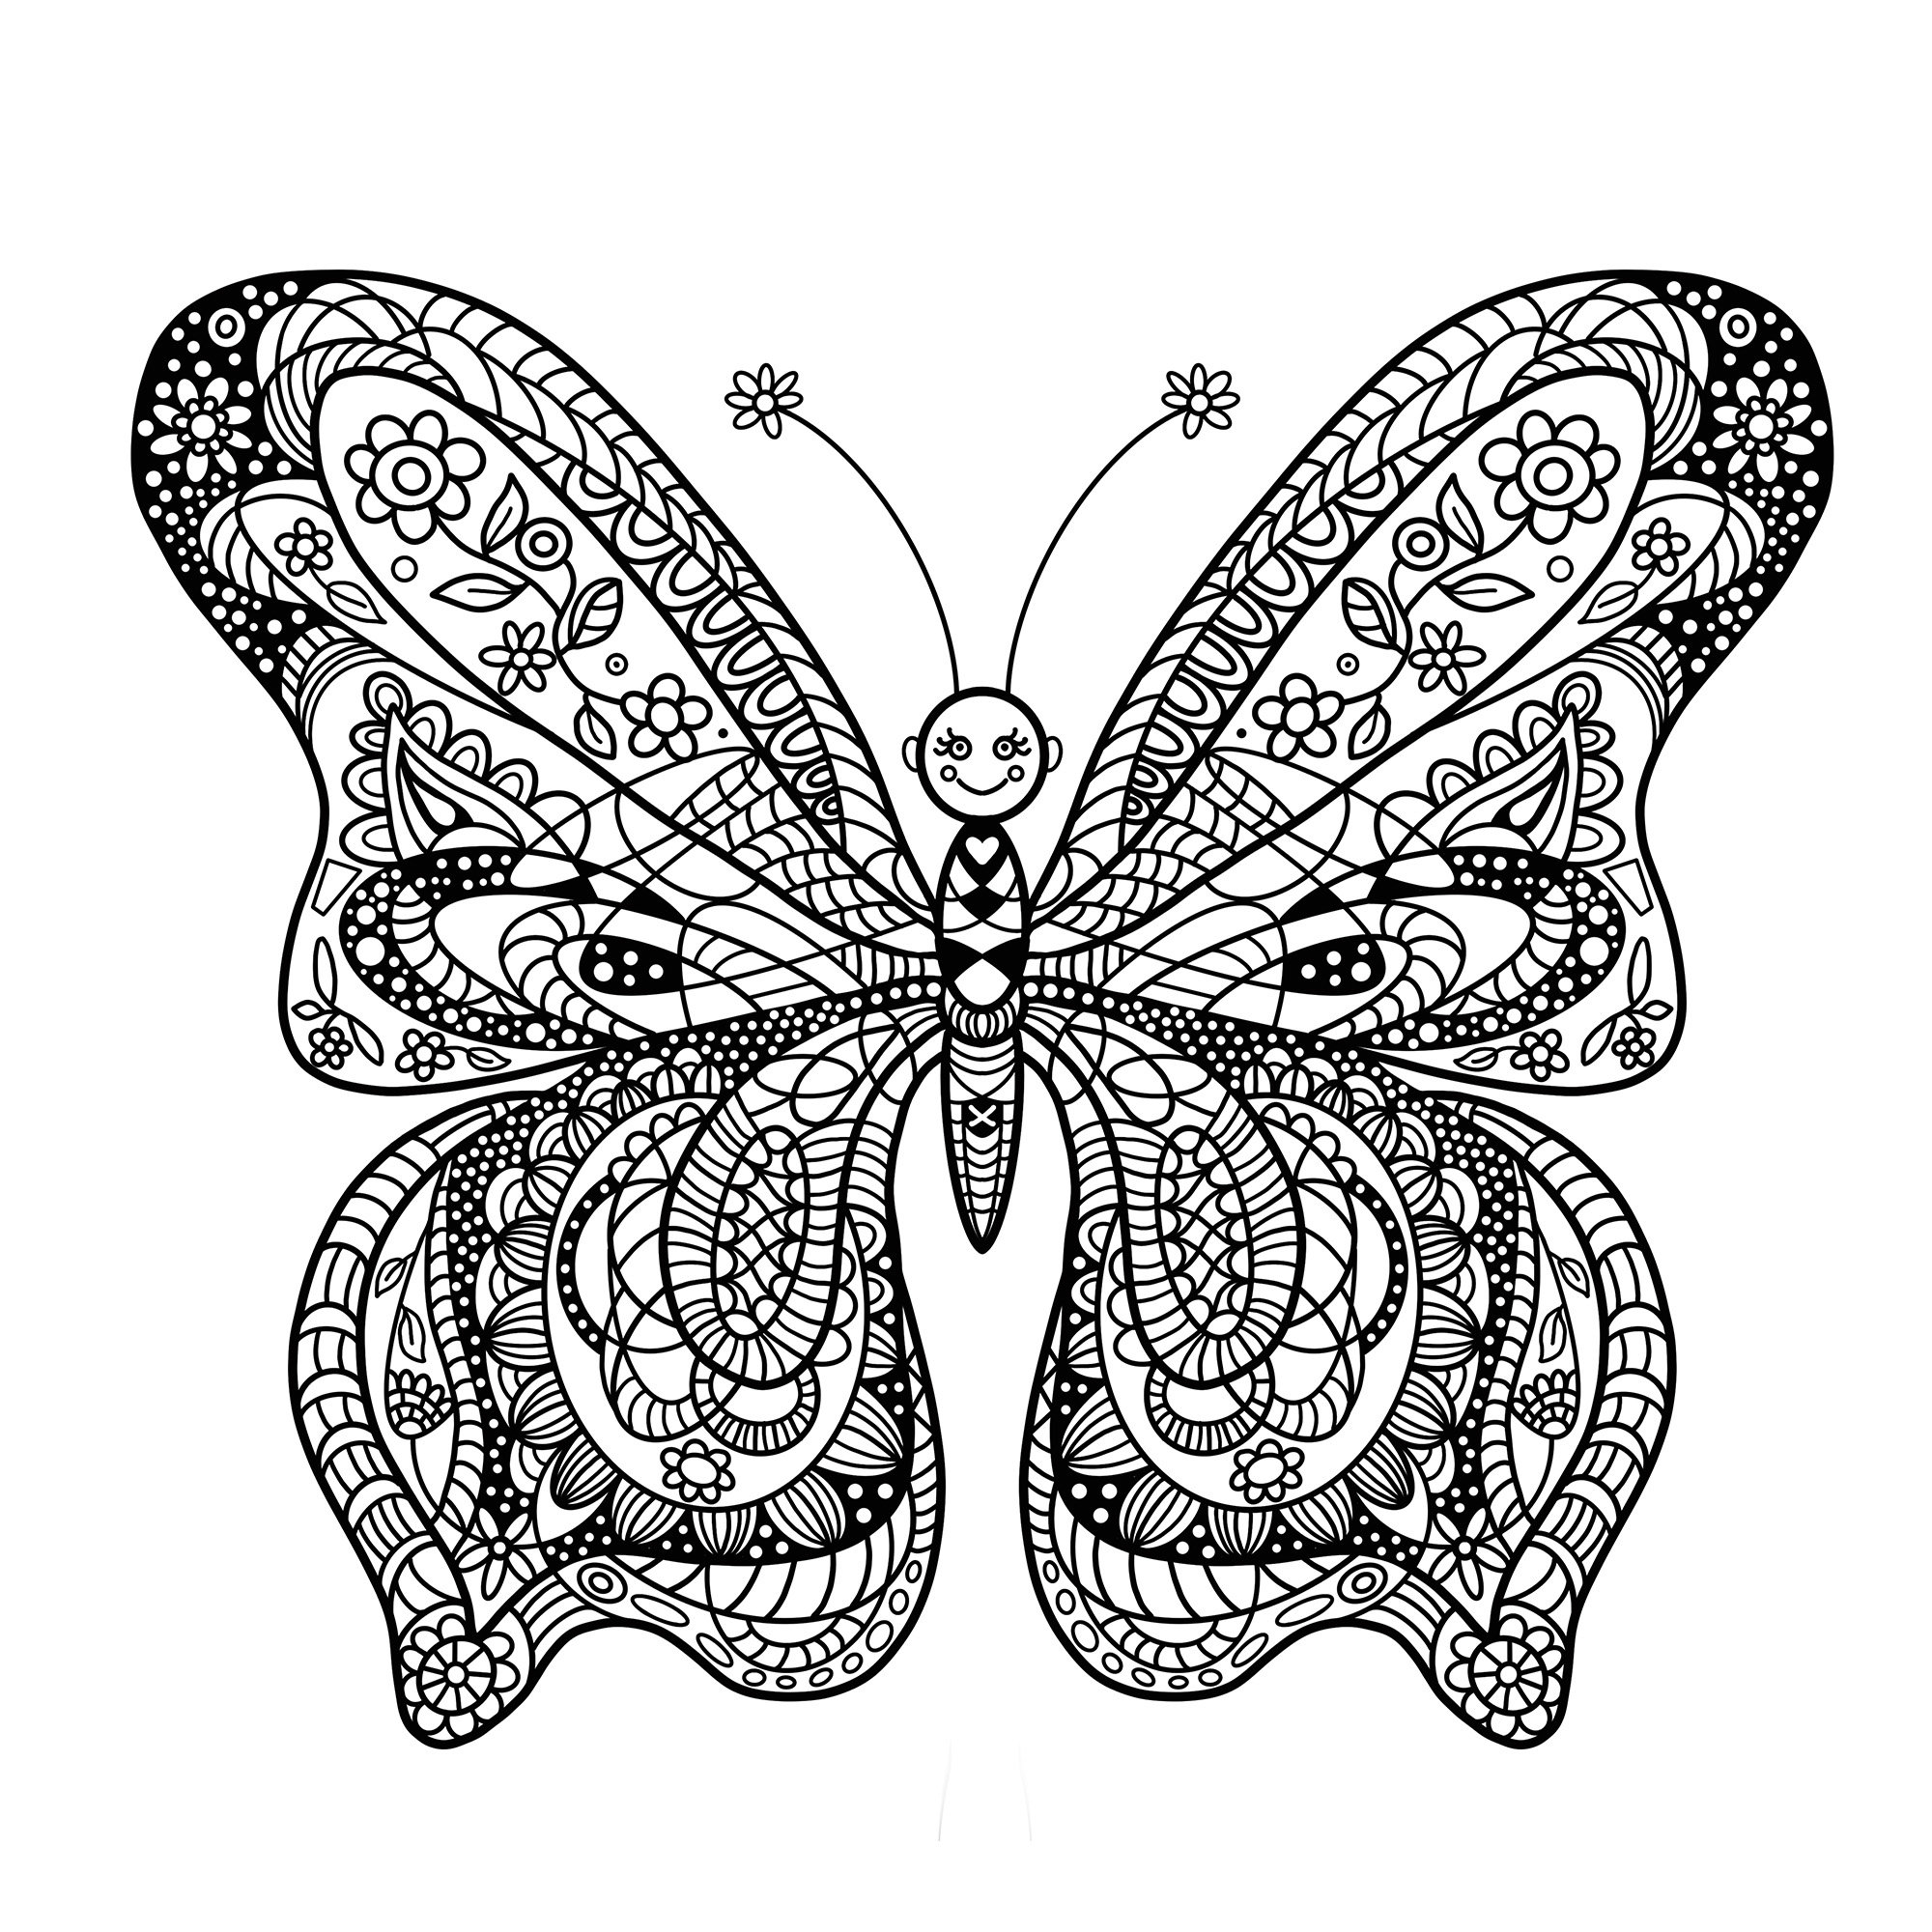 Mandala colouring page butterfly coloring pages mandala printable page printable colouring page adult coloring pages mandala coloring